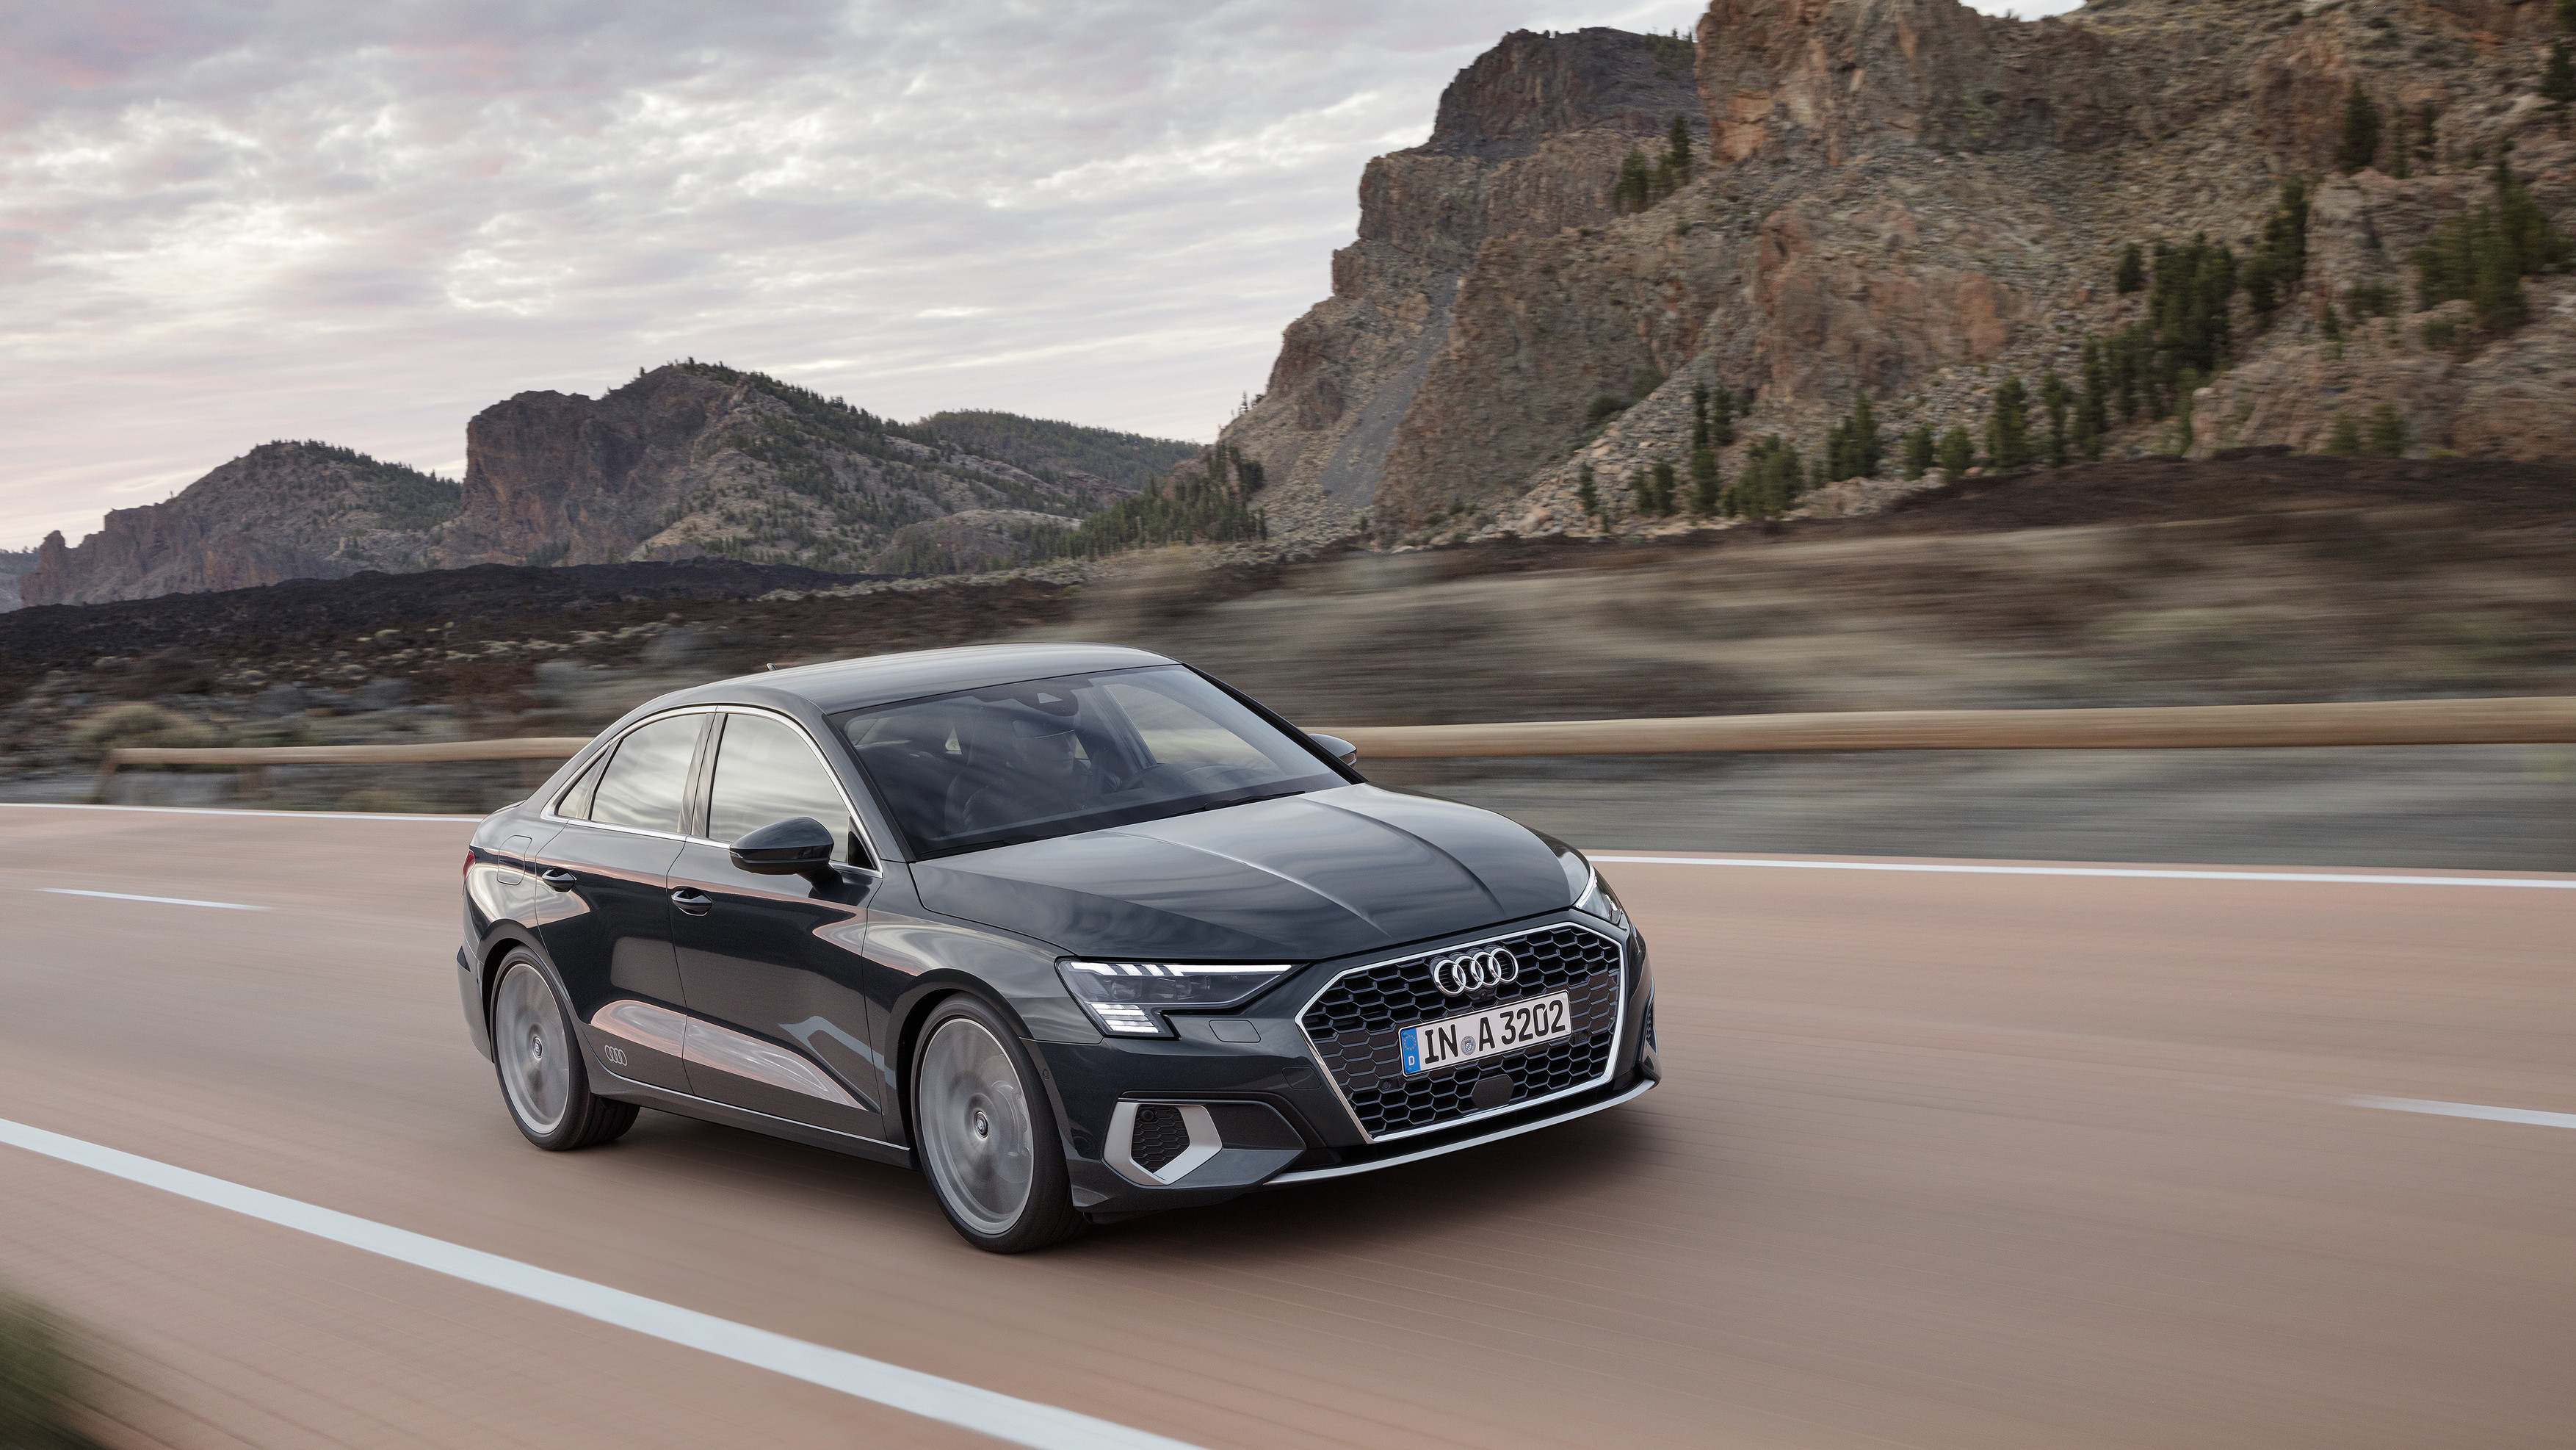 Audi Introduces All-New A3 and S3 Models for 2022